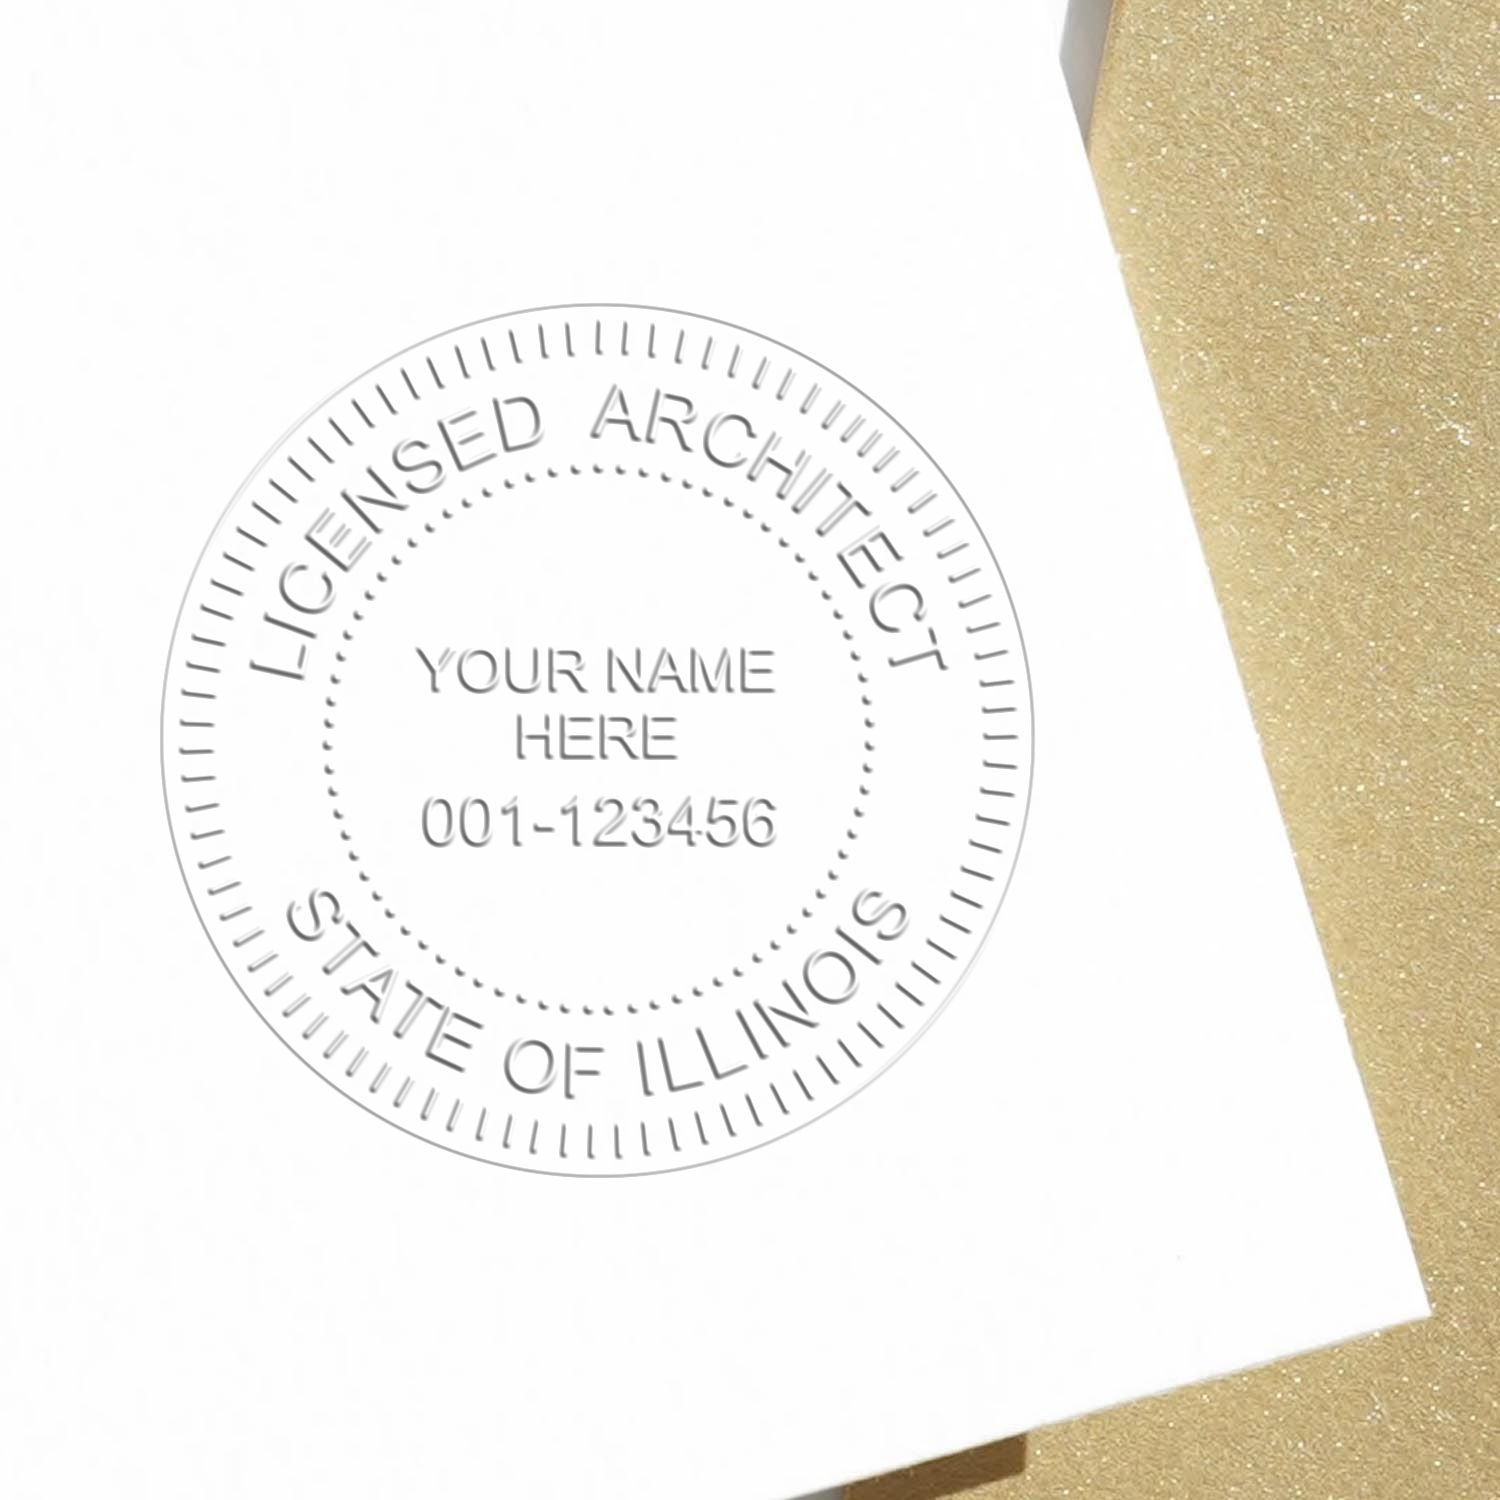 This paper is stamped with a sample imprint of the Extended Long Reach Illinois Architect Seal Embosser, signifying its quality and reliability.